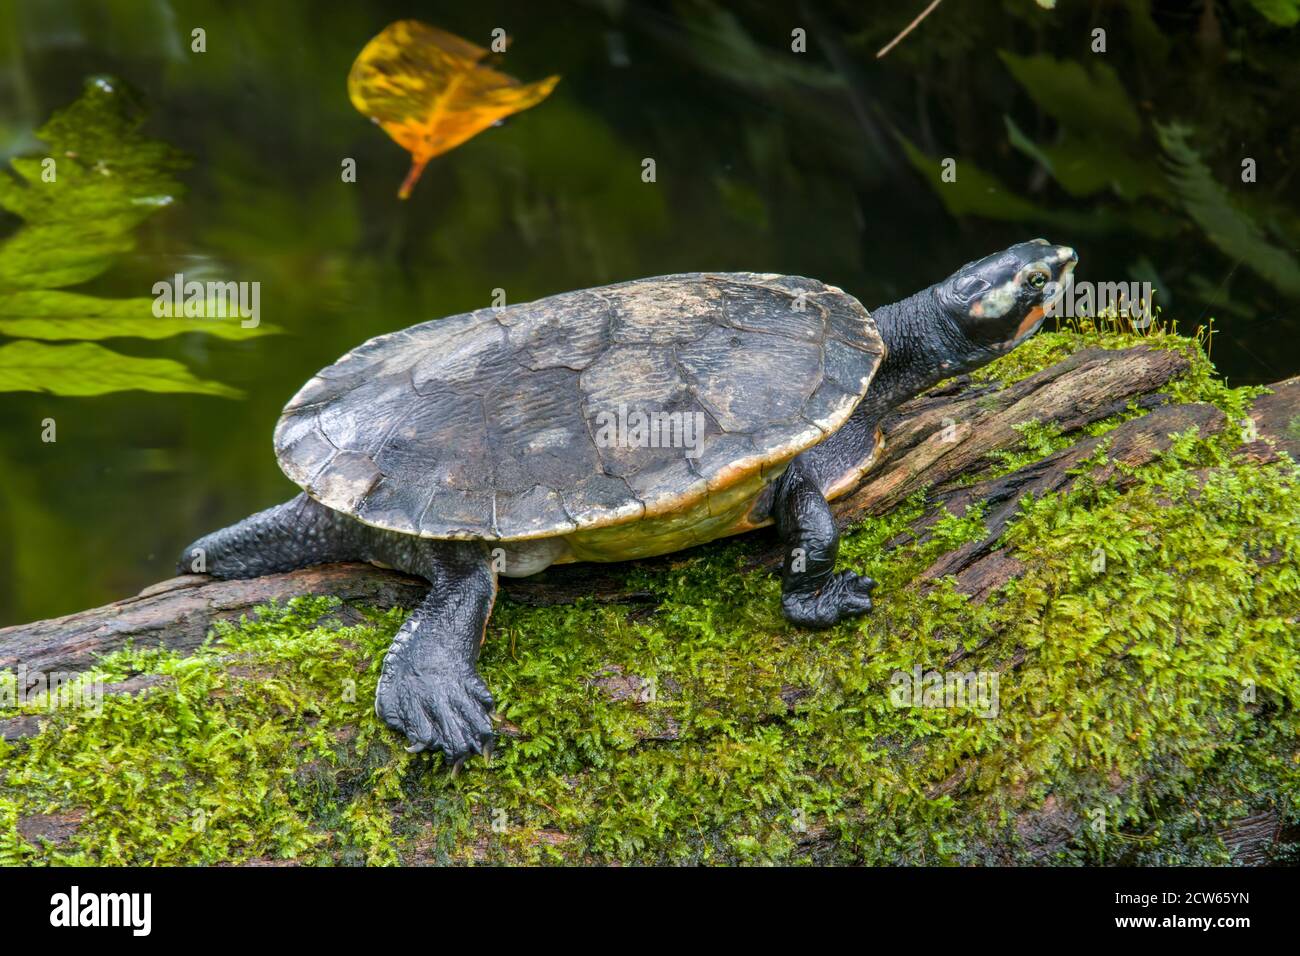 A  painted terrapin (Batagur borneoensis) rests on the log, which is a species of turtles in the family Geoemydidae. Stock Photo